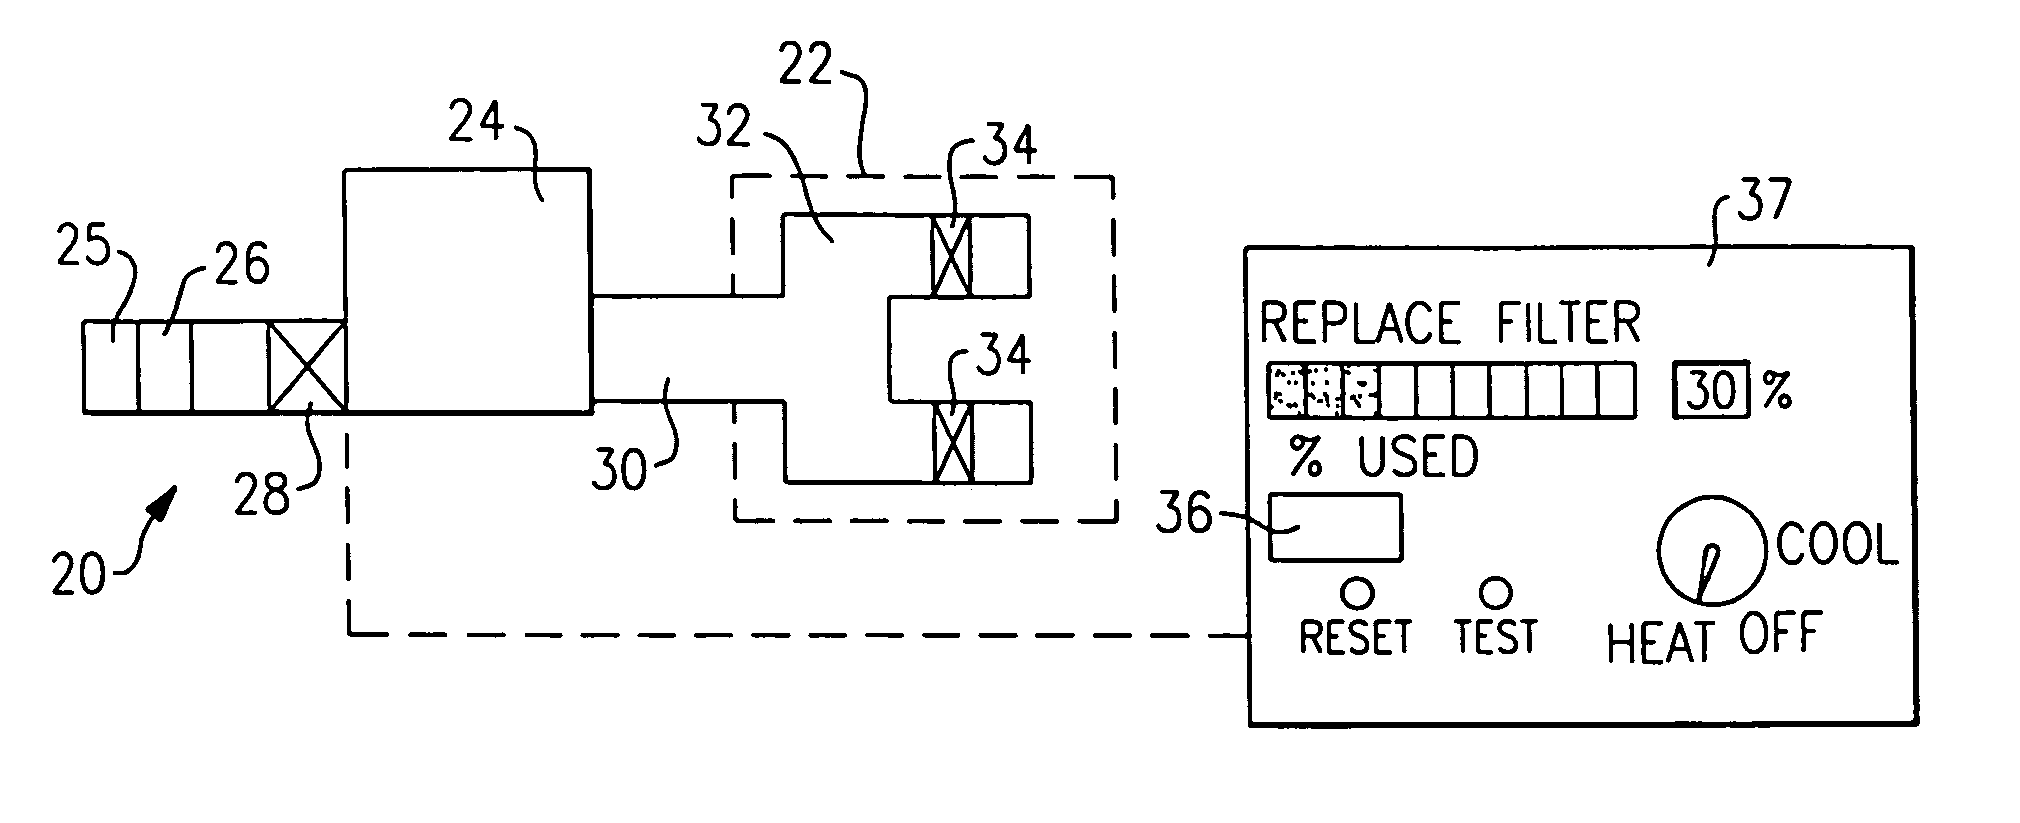 Detection of clogged filter in an HVAC system